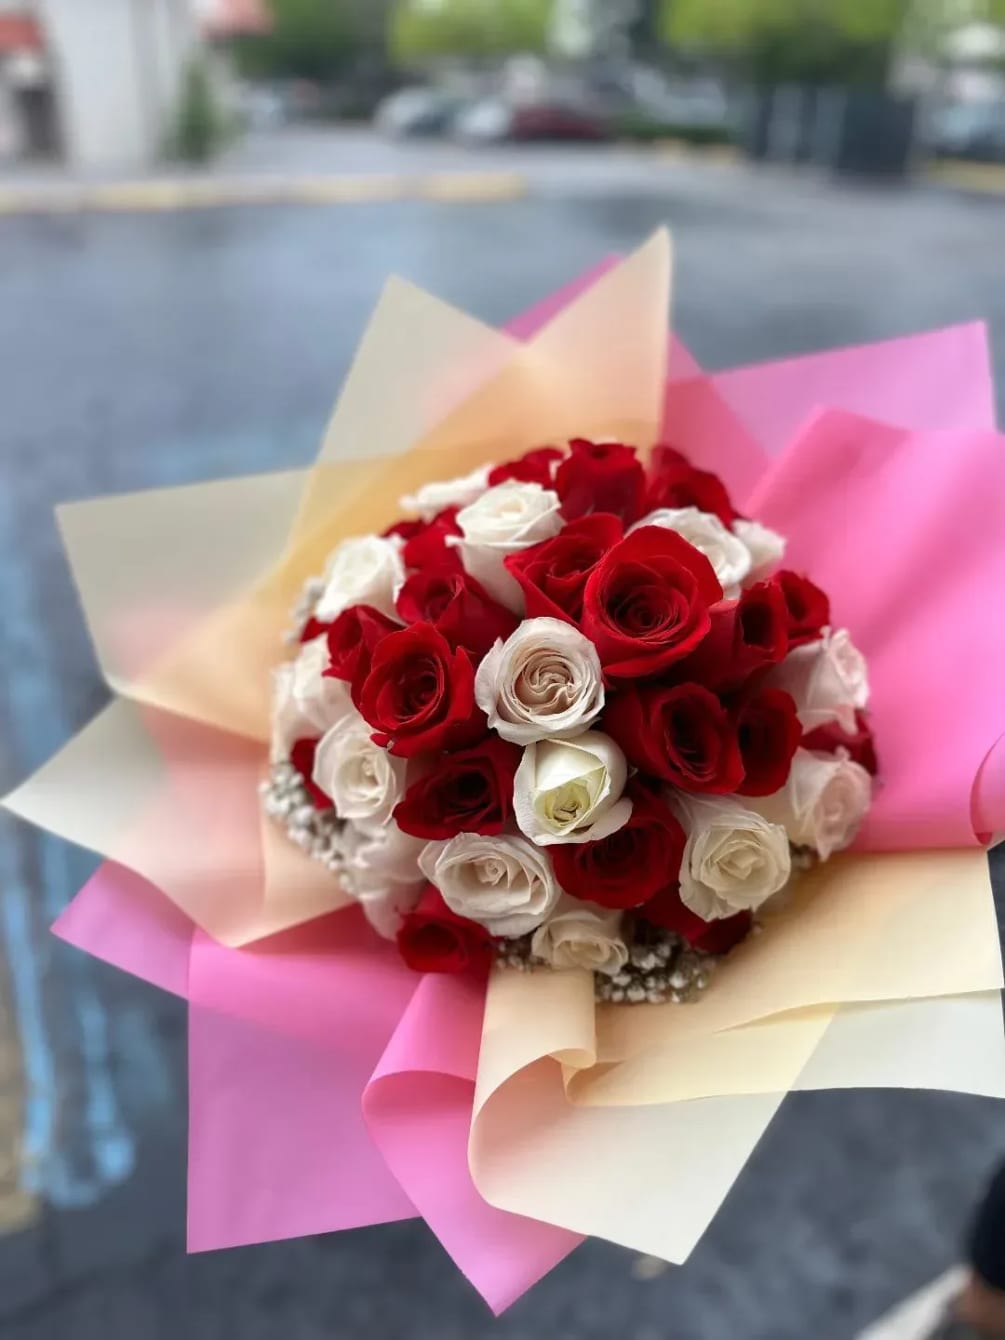 Send this unique wrapped Buchon, get 30 roses standard, get 50 roses